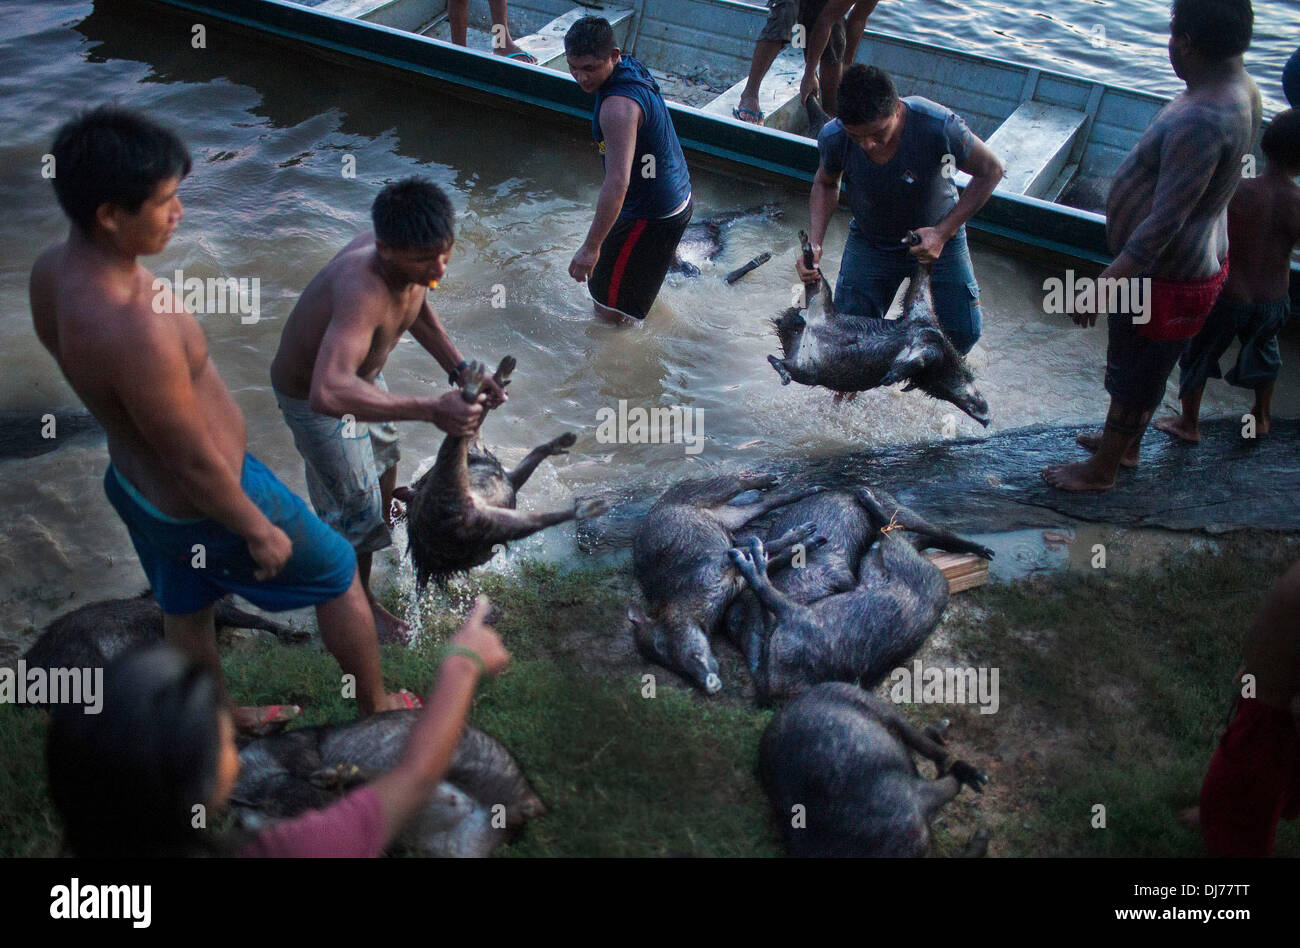 May 5, 2013 - Poti-Kro, Para, Brazil - Xikrin hunters offload a large haul of peccary to be cleaned in the river in the remaining light of day. For the next few days, the villagers will eat mostly peccary so that the meat will not go to waste. Xikrin people live on the Bacaja, a tributary of the Xingu River, where construction of the Belo Monte Dam is reaching peak construction. Some scientists warn that the water level of the Bacaja will decrease precipitously due to the dam. (Credit Image: © Taylor Weidman/ZUMA Wire/ZUMAPRESS.com) Stock Photo